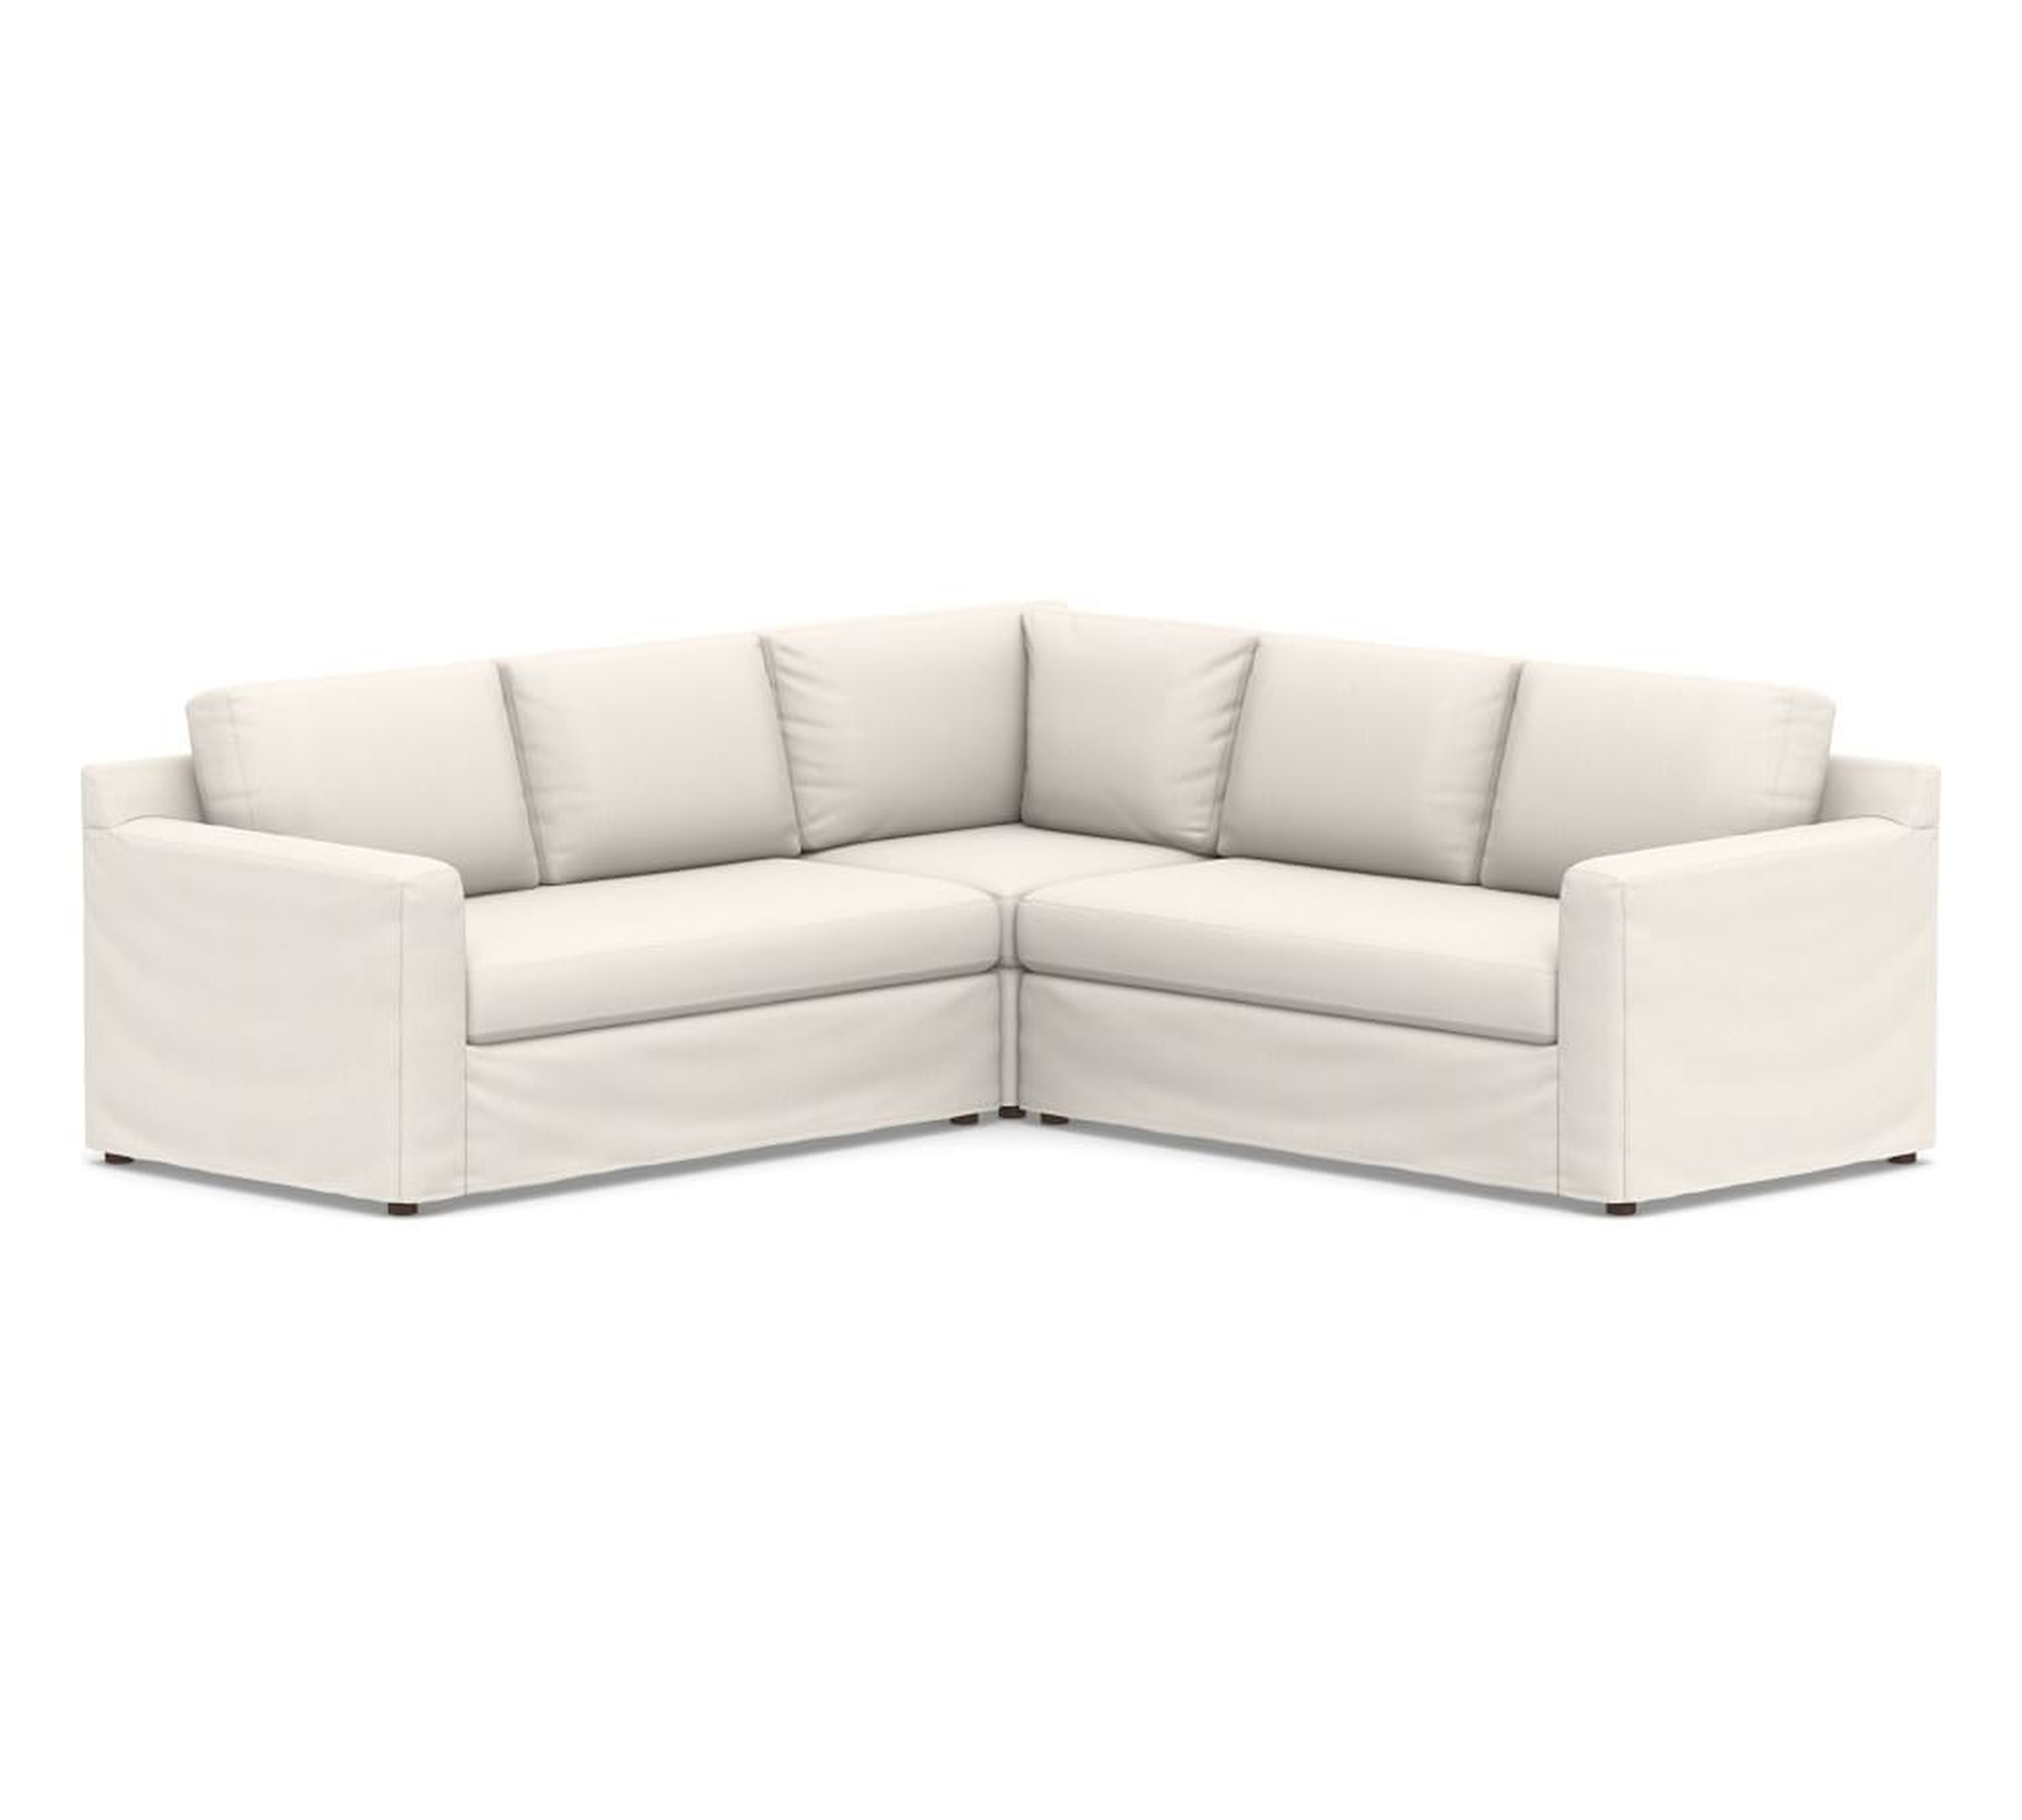 Shasta Square Arm Slipcovered 3-Piece L-Shaped Corner Sectional - Pottery Barn